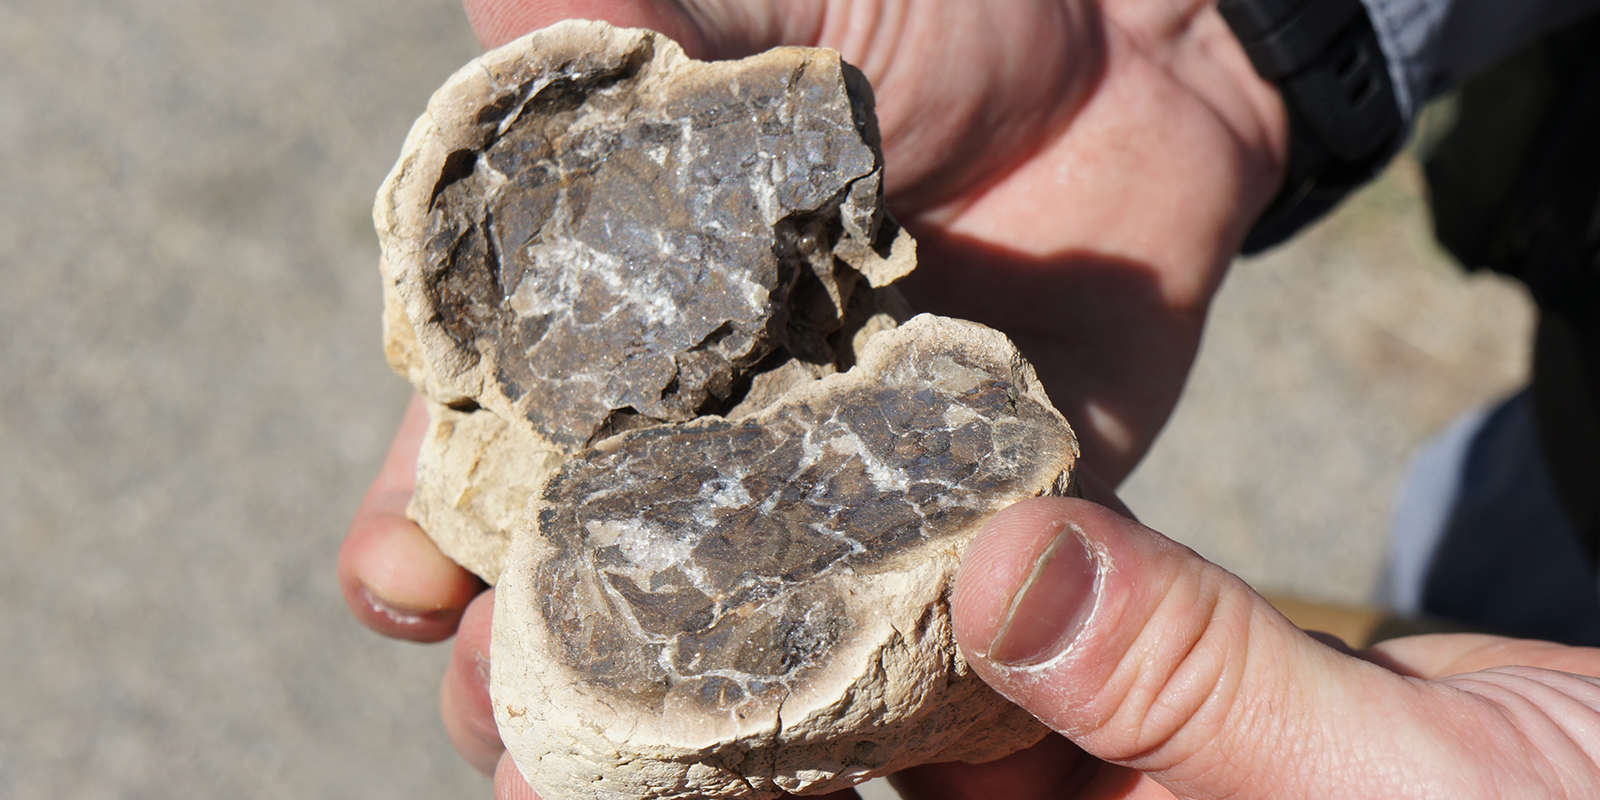 A fossil concretion recently cracked open and held in a persons' hands